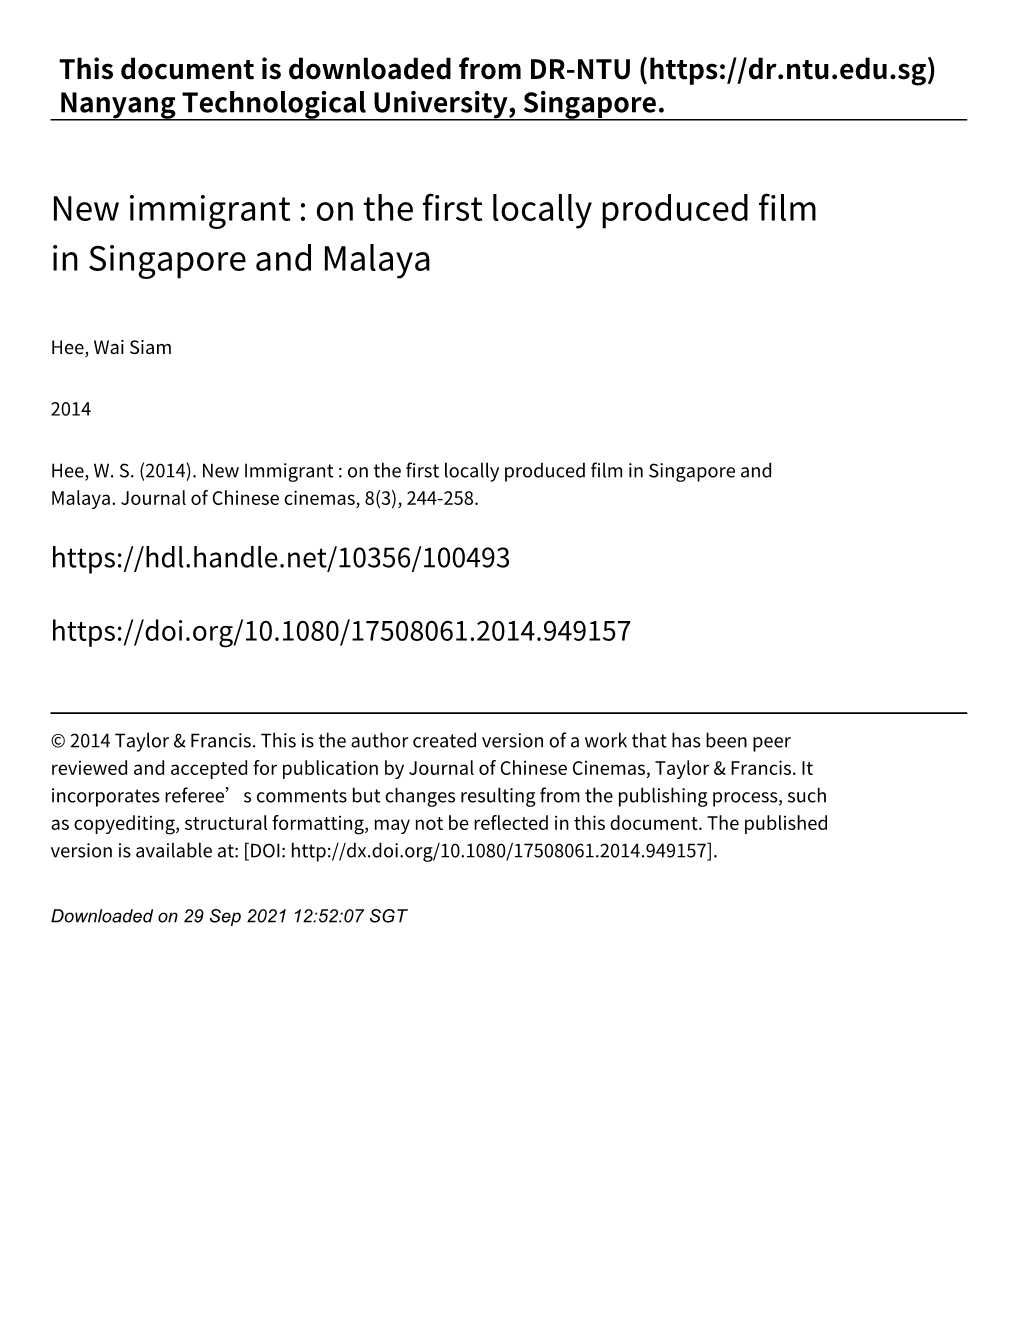 New Immigrant : on the First Locally Produced Film in Singapore and Malaya